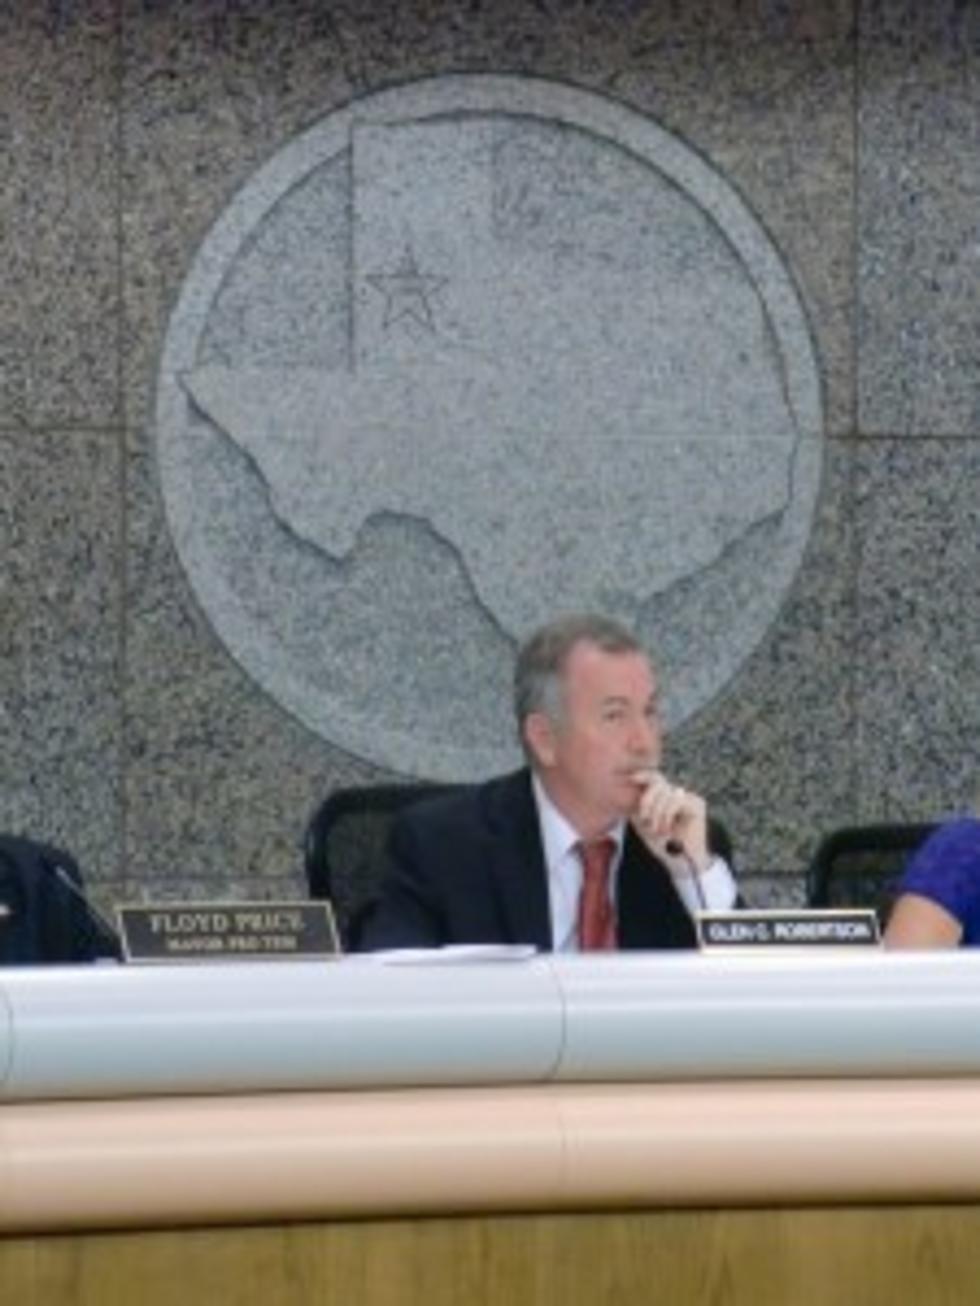 Lubbock Mayor Glen Robertson Suggests Reducing His Staff to Avoid More New Hires